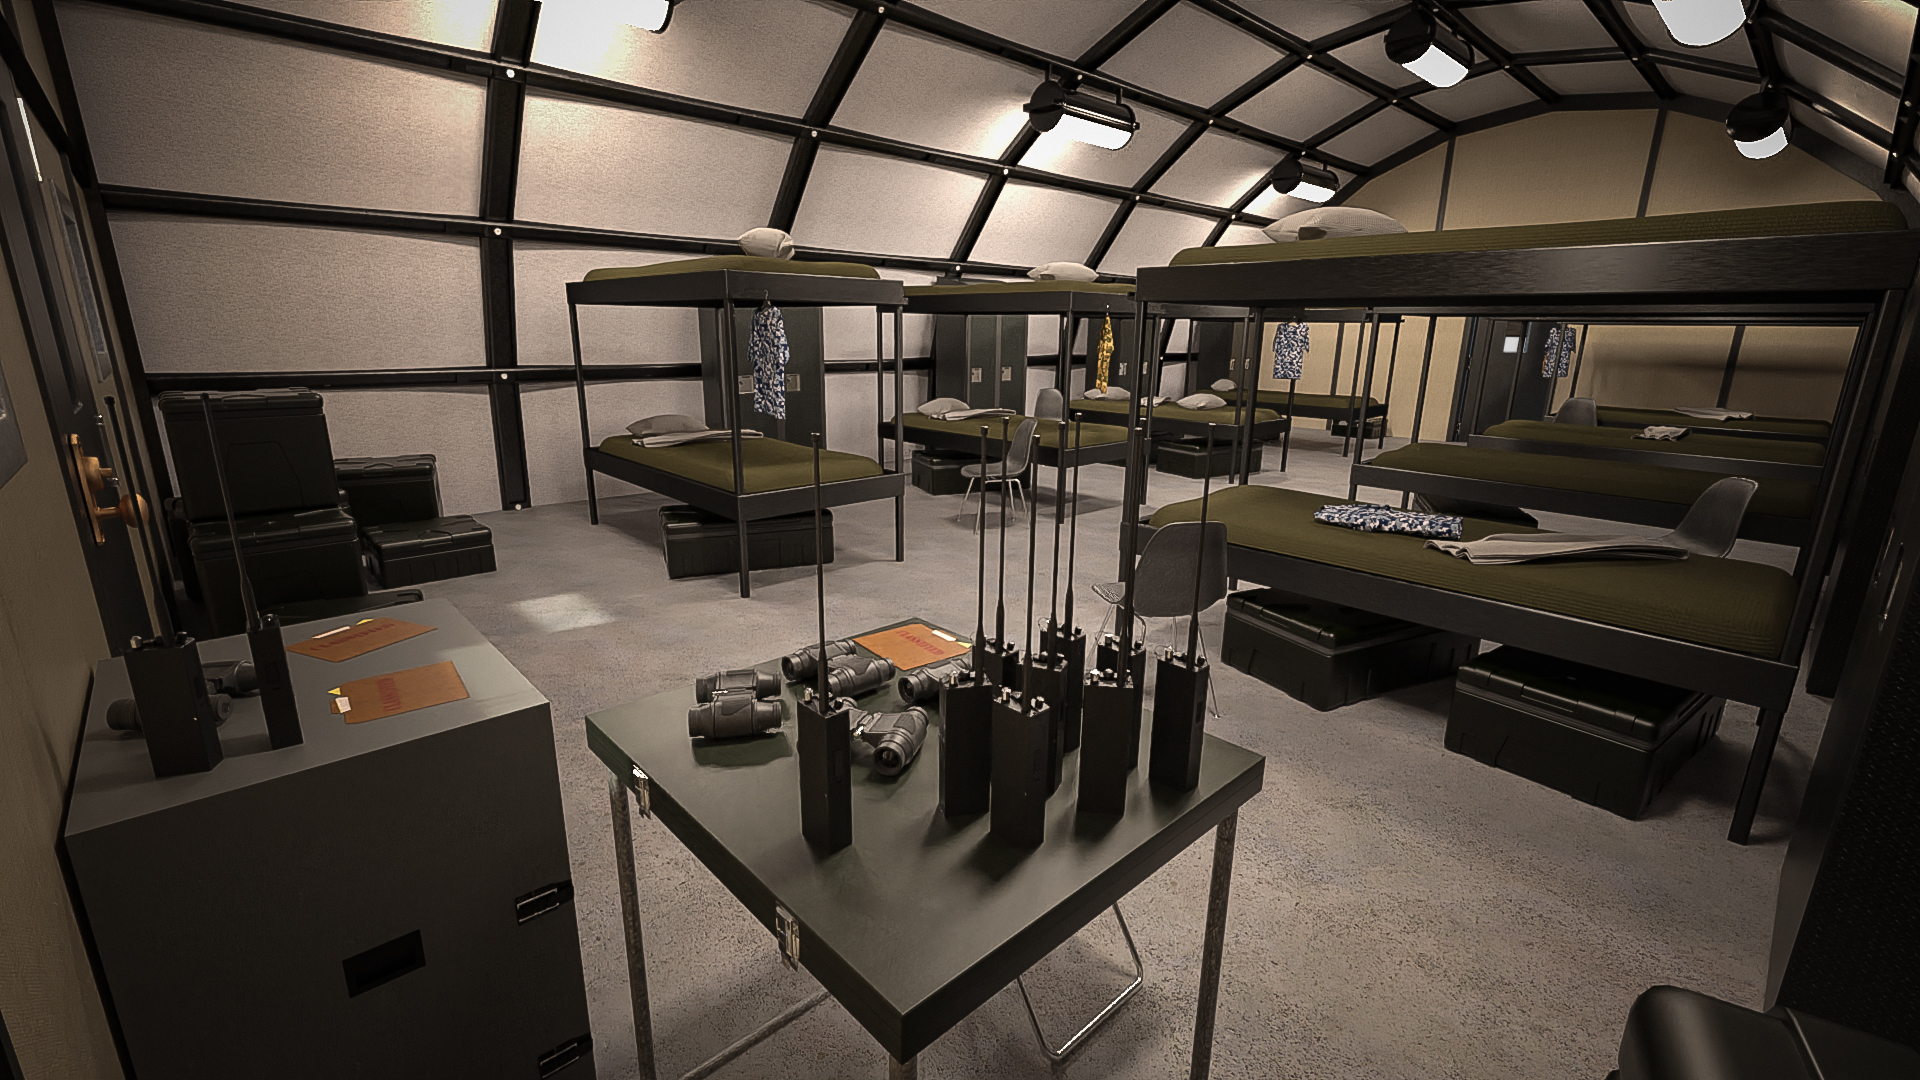 Military Camp by: Tesla3dCorp, 3D Models by Daz 3D